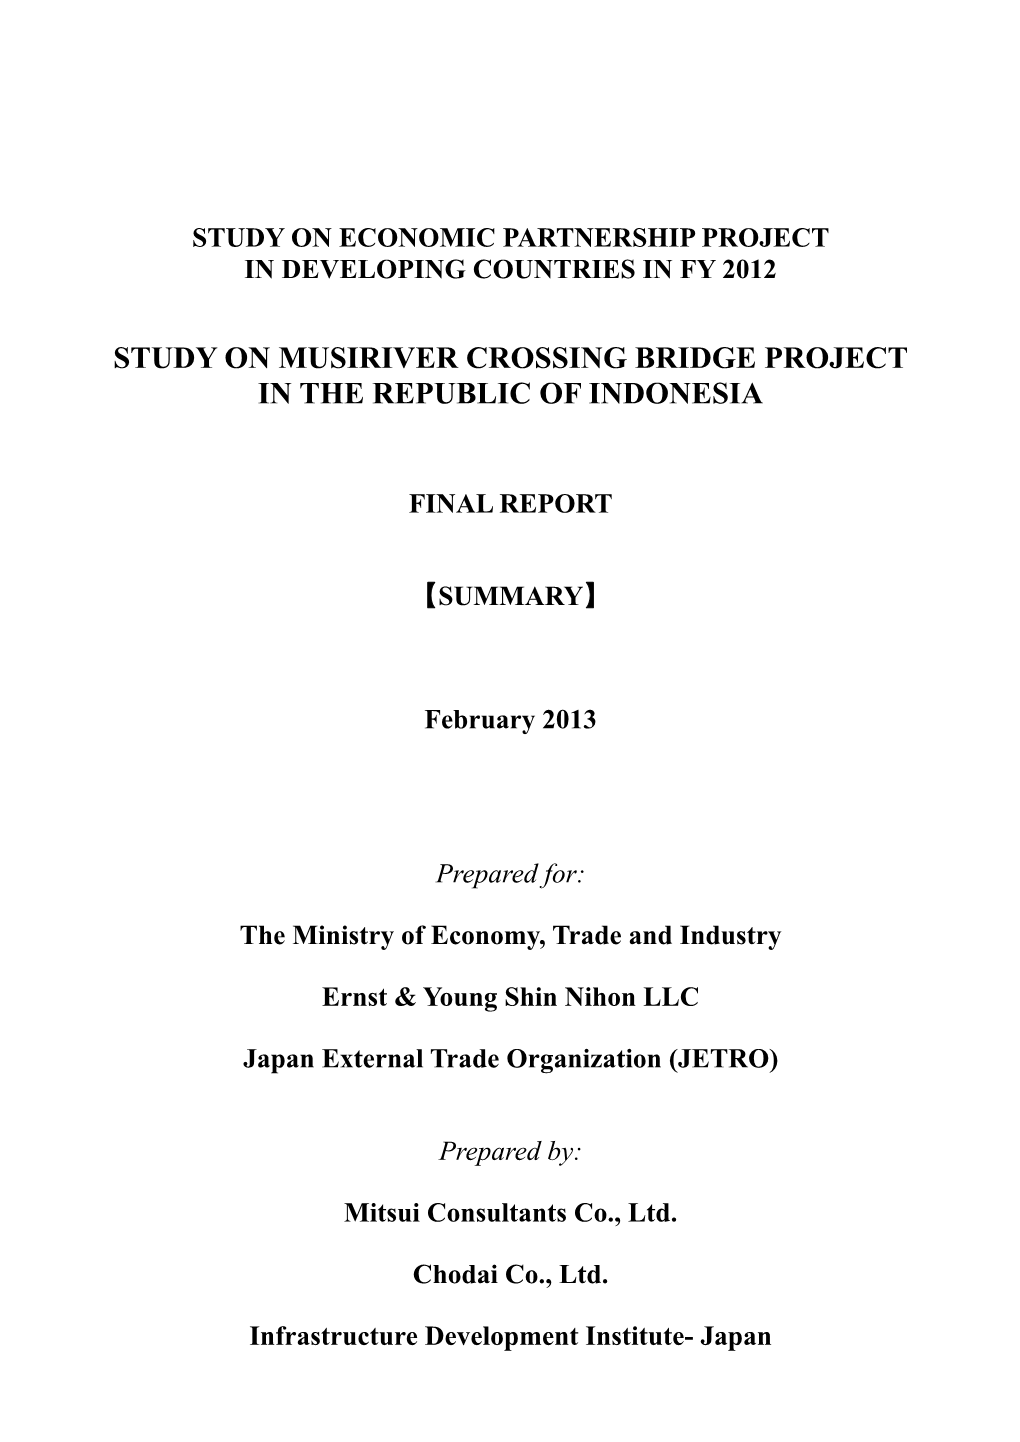 Study on Musiriver Crossing Bridge Project in the Republic of Indonesia